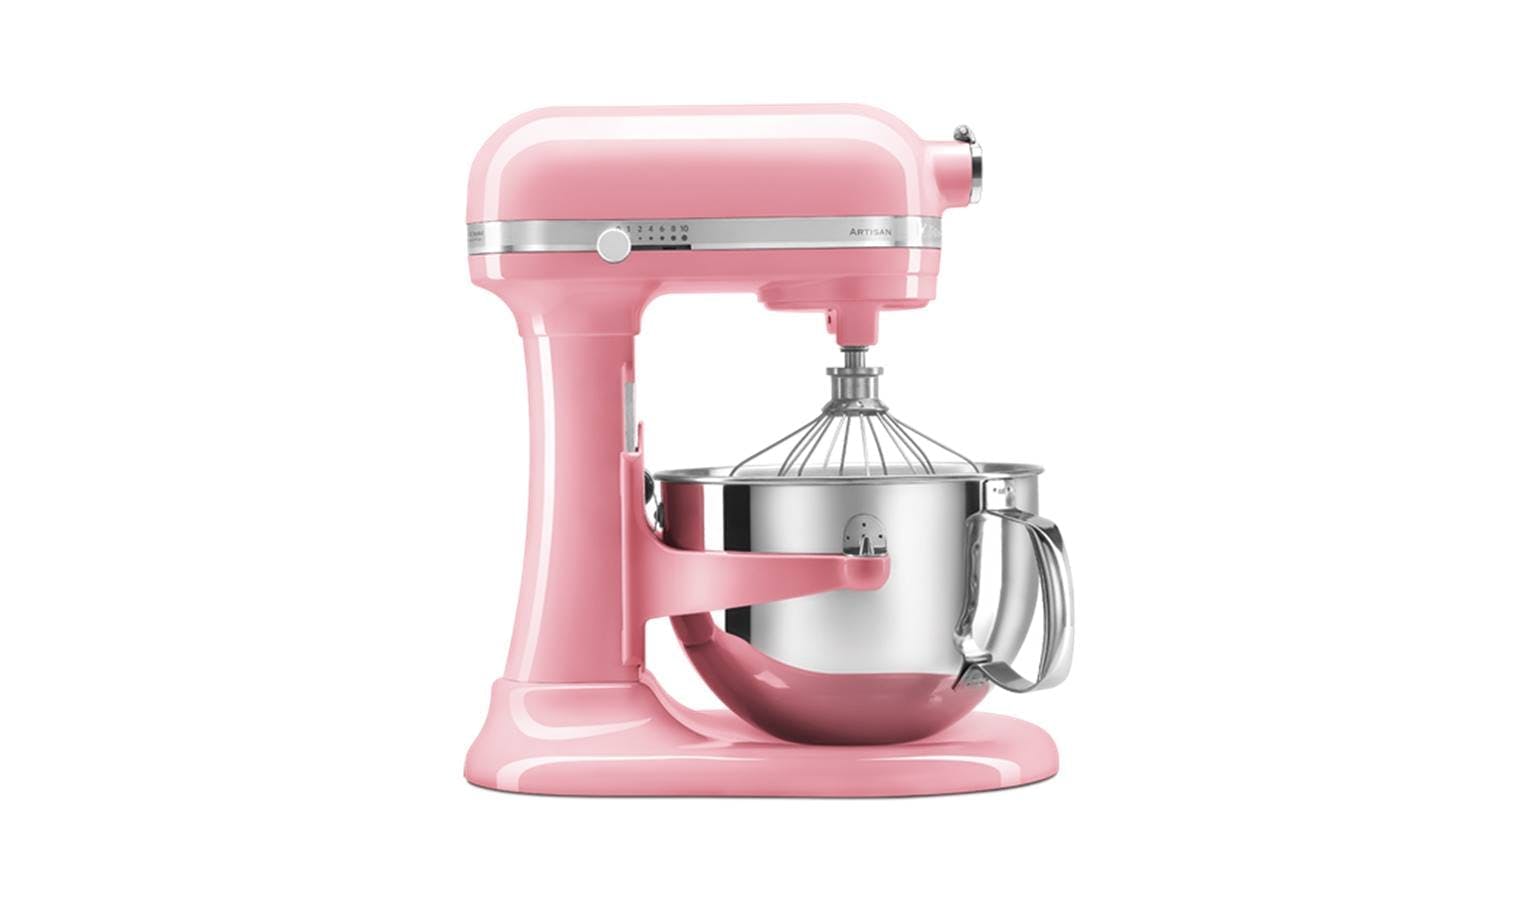 https://hnsgsfp.imgix.net/9/images/detailed/61/KitchenAid_Artisan_5KSM6585GDR_5.7L_Stand_Mixer_-_Dried_Rose.jpg?fit=fill&bg=0FFF&w=1536&h=900&auto=format,compress